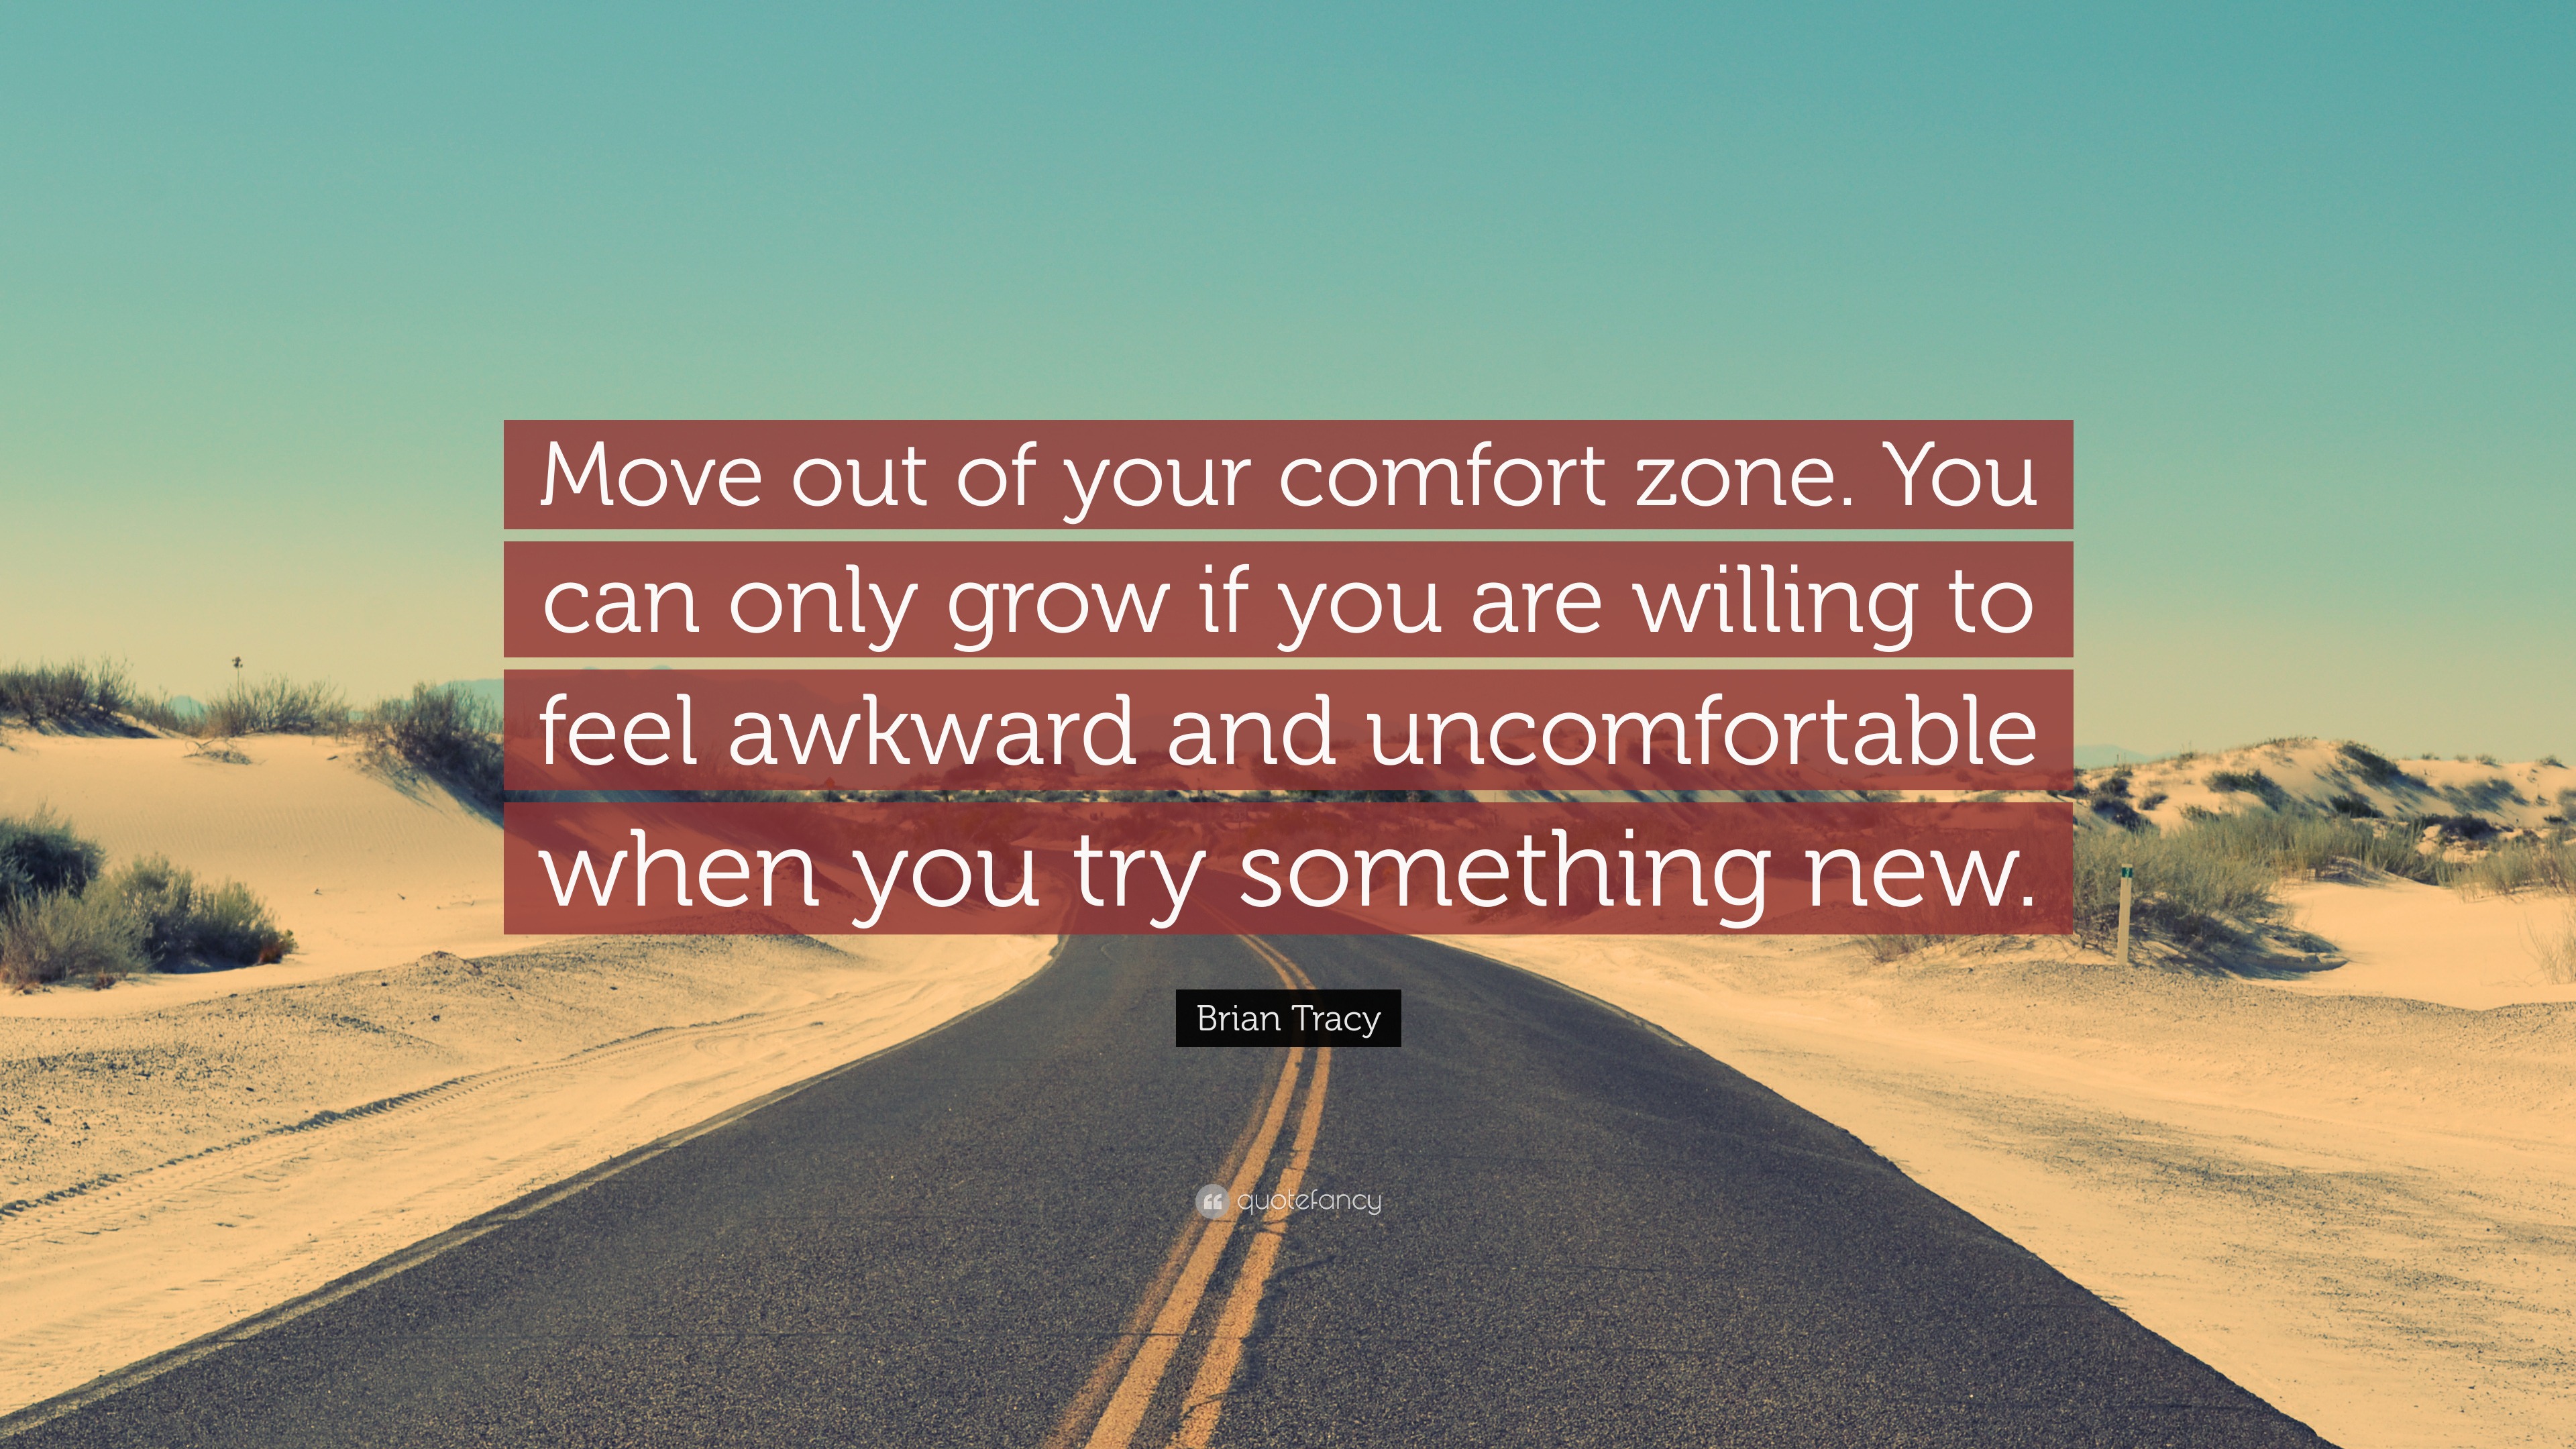 Brian Tracy Quote “move Out Of Your Comfort Zone You Can Only Grow If You Are Willing To Feel